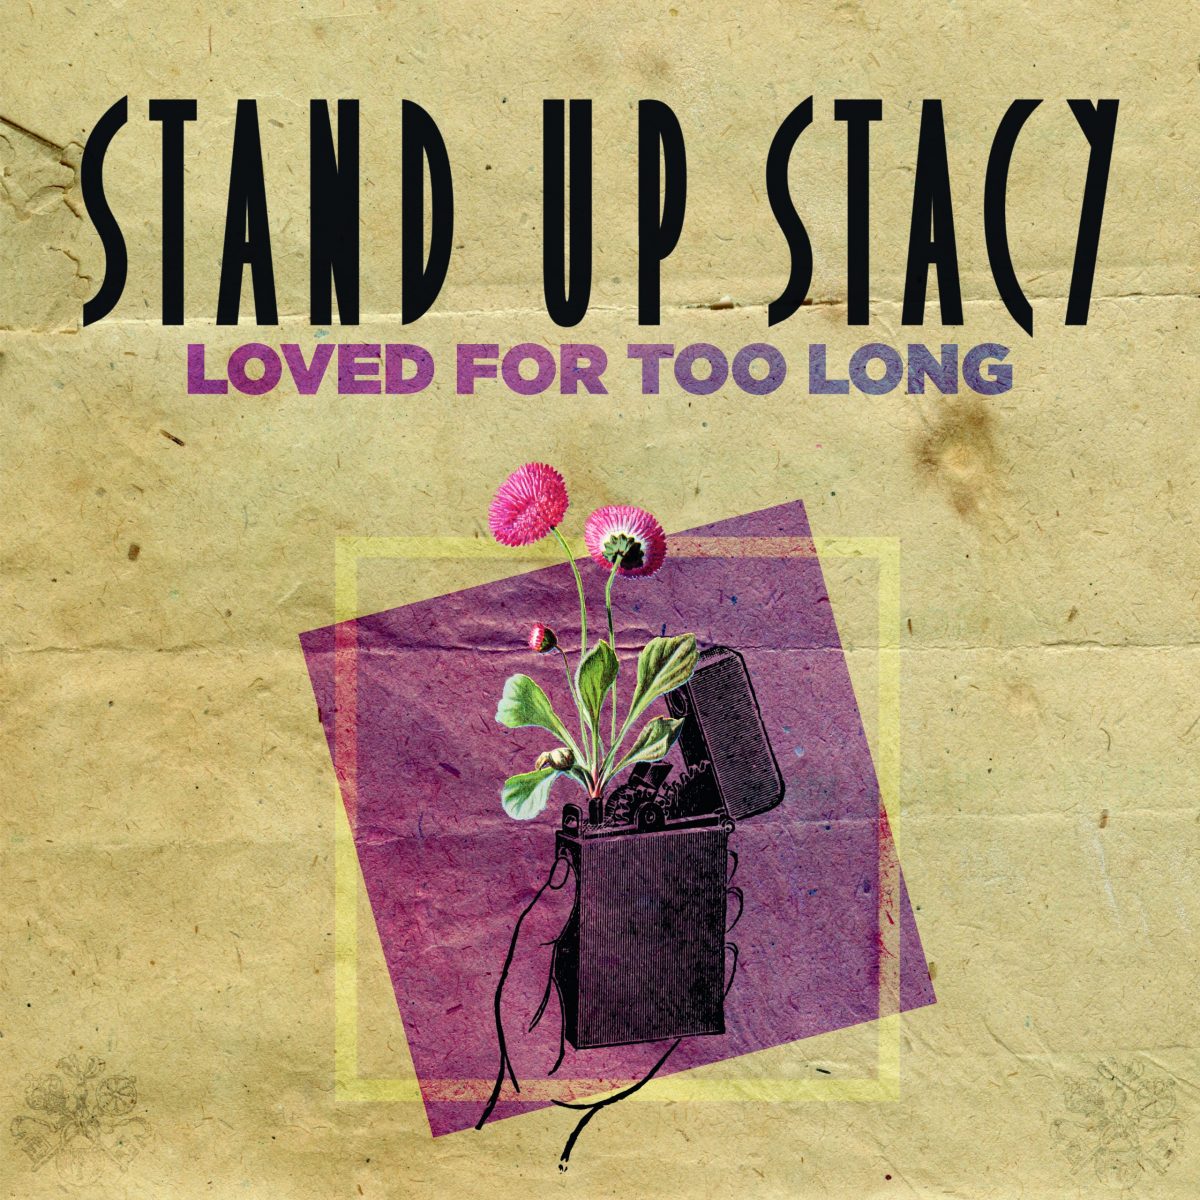 stand-up-stacy-veroeffentlichen-loved-for-too-long-news